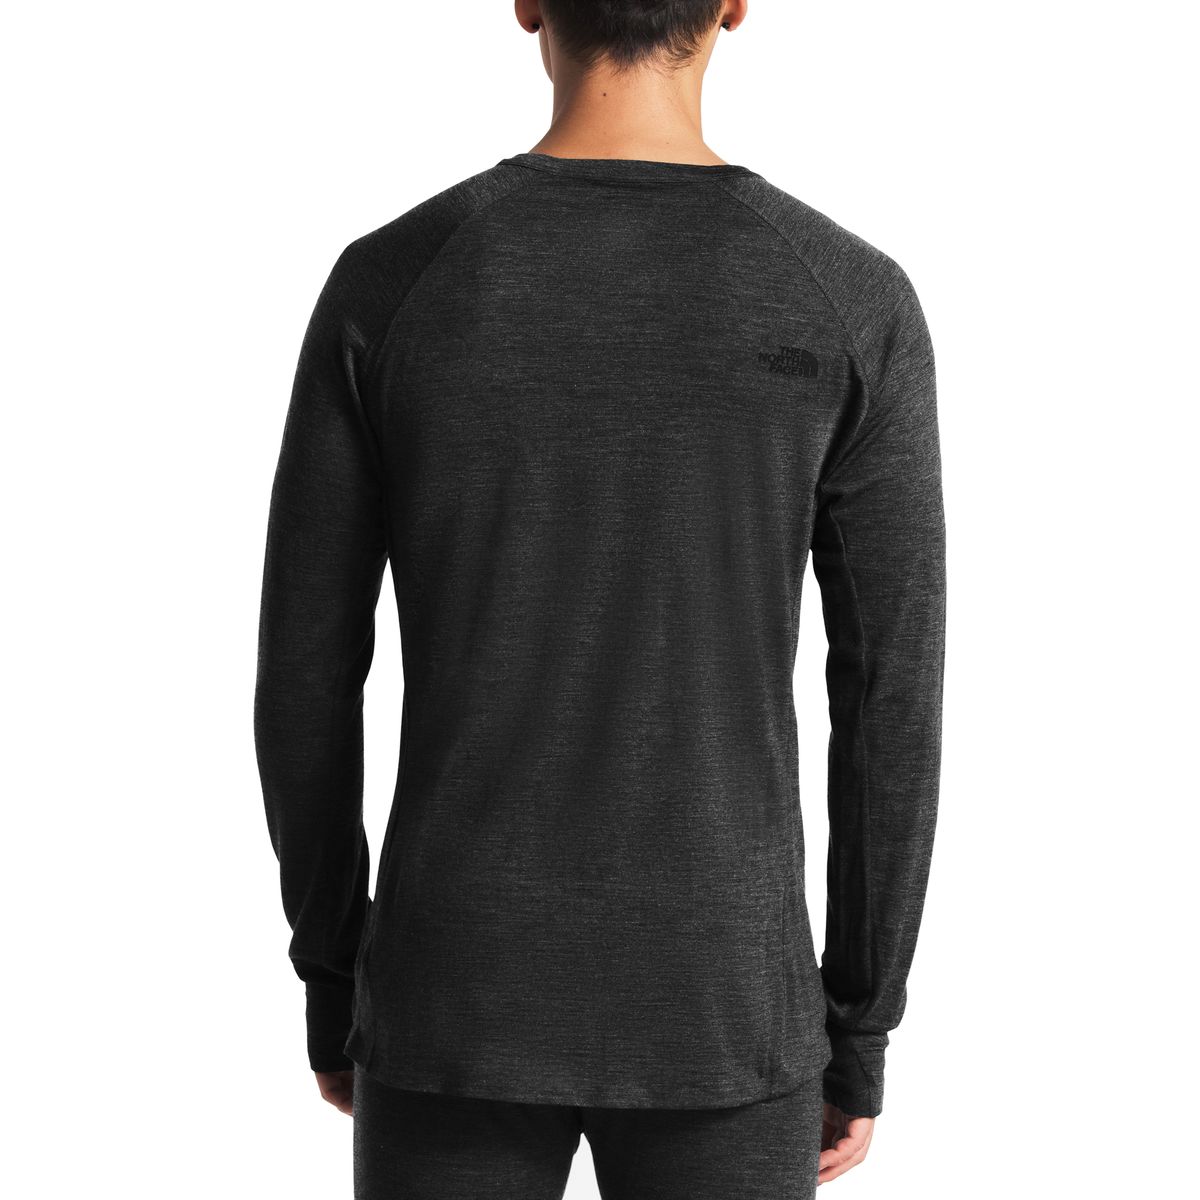 The North Face Merino Wool Baselayer Crew-Neck Top - Men's - Clothing